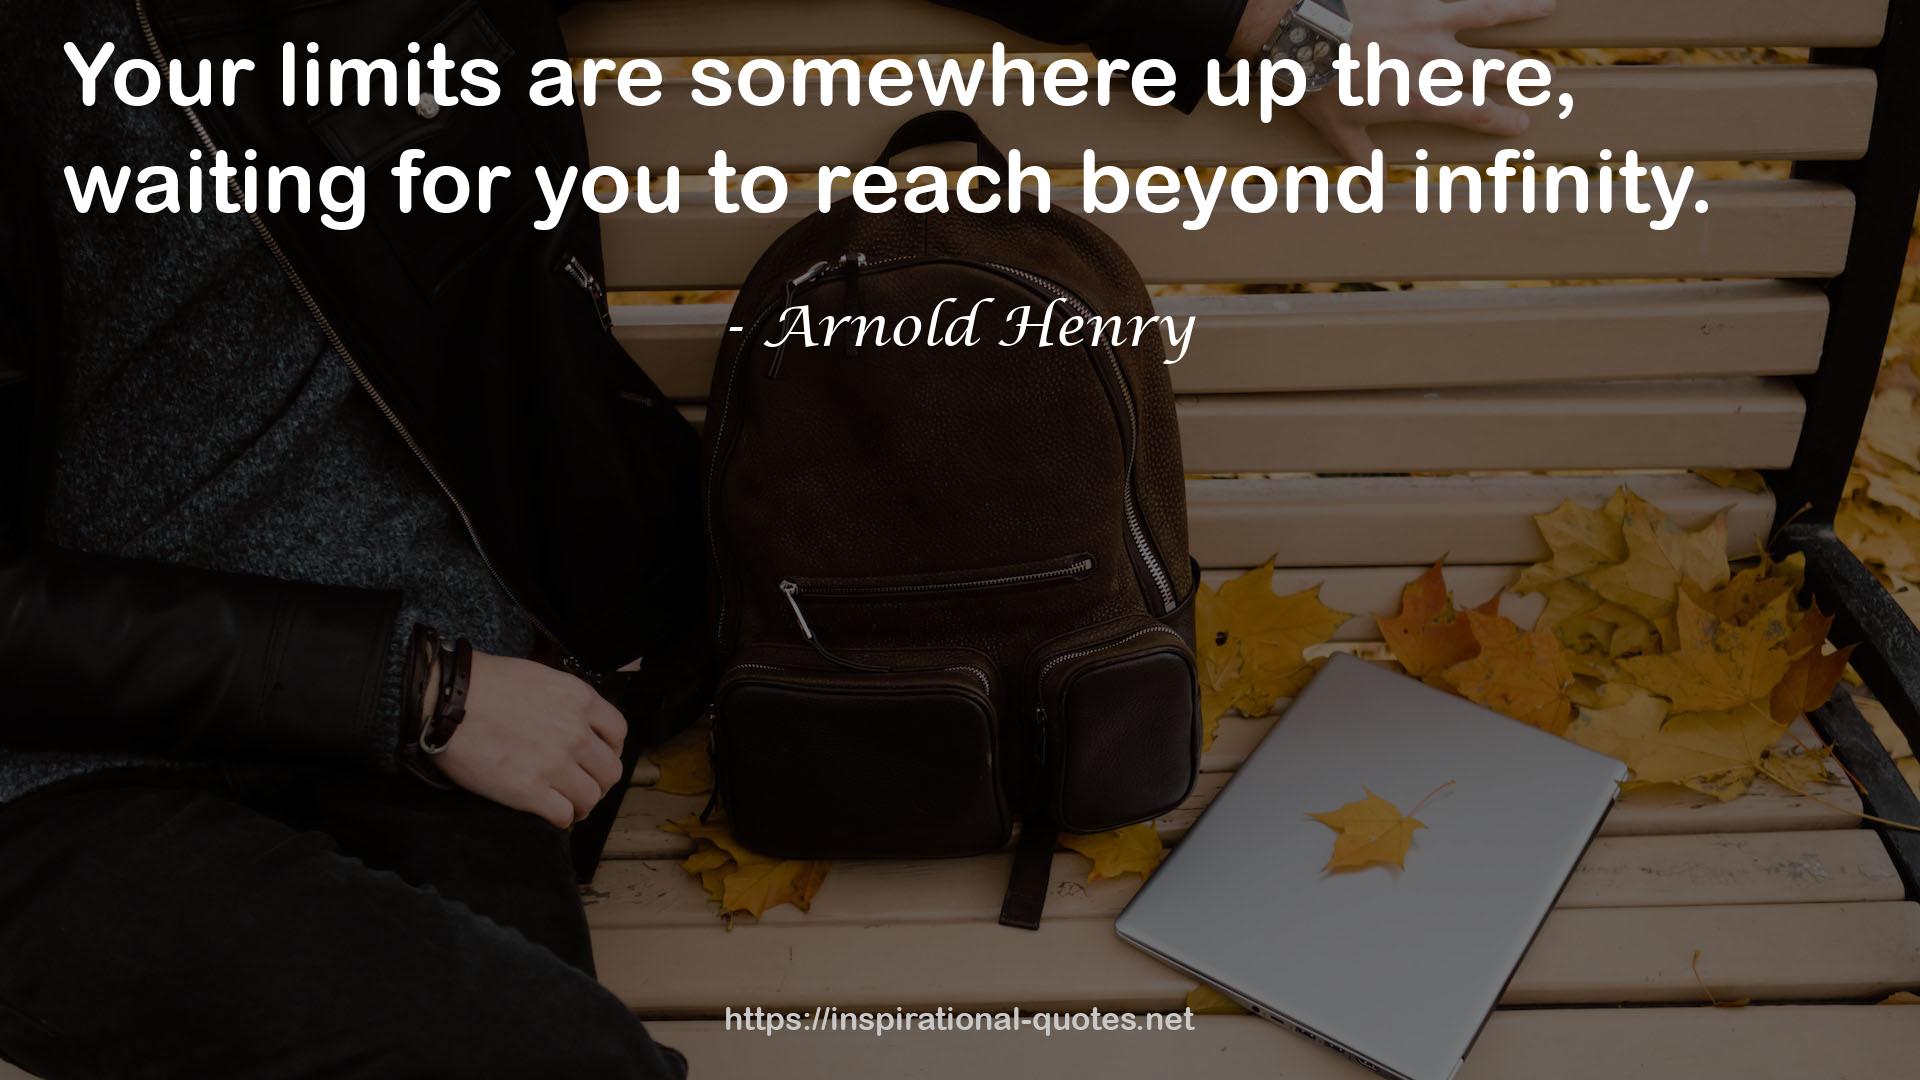 Arnold Henry QUOTES